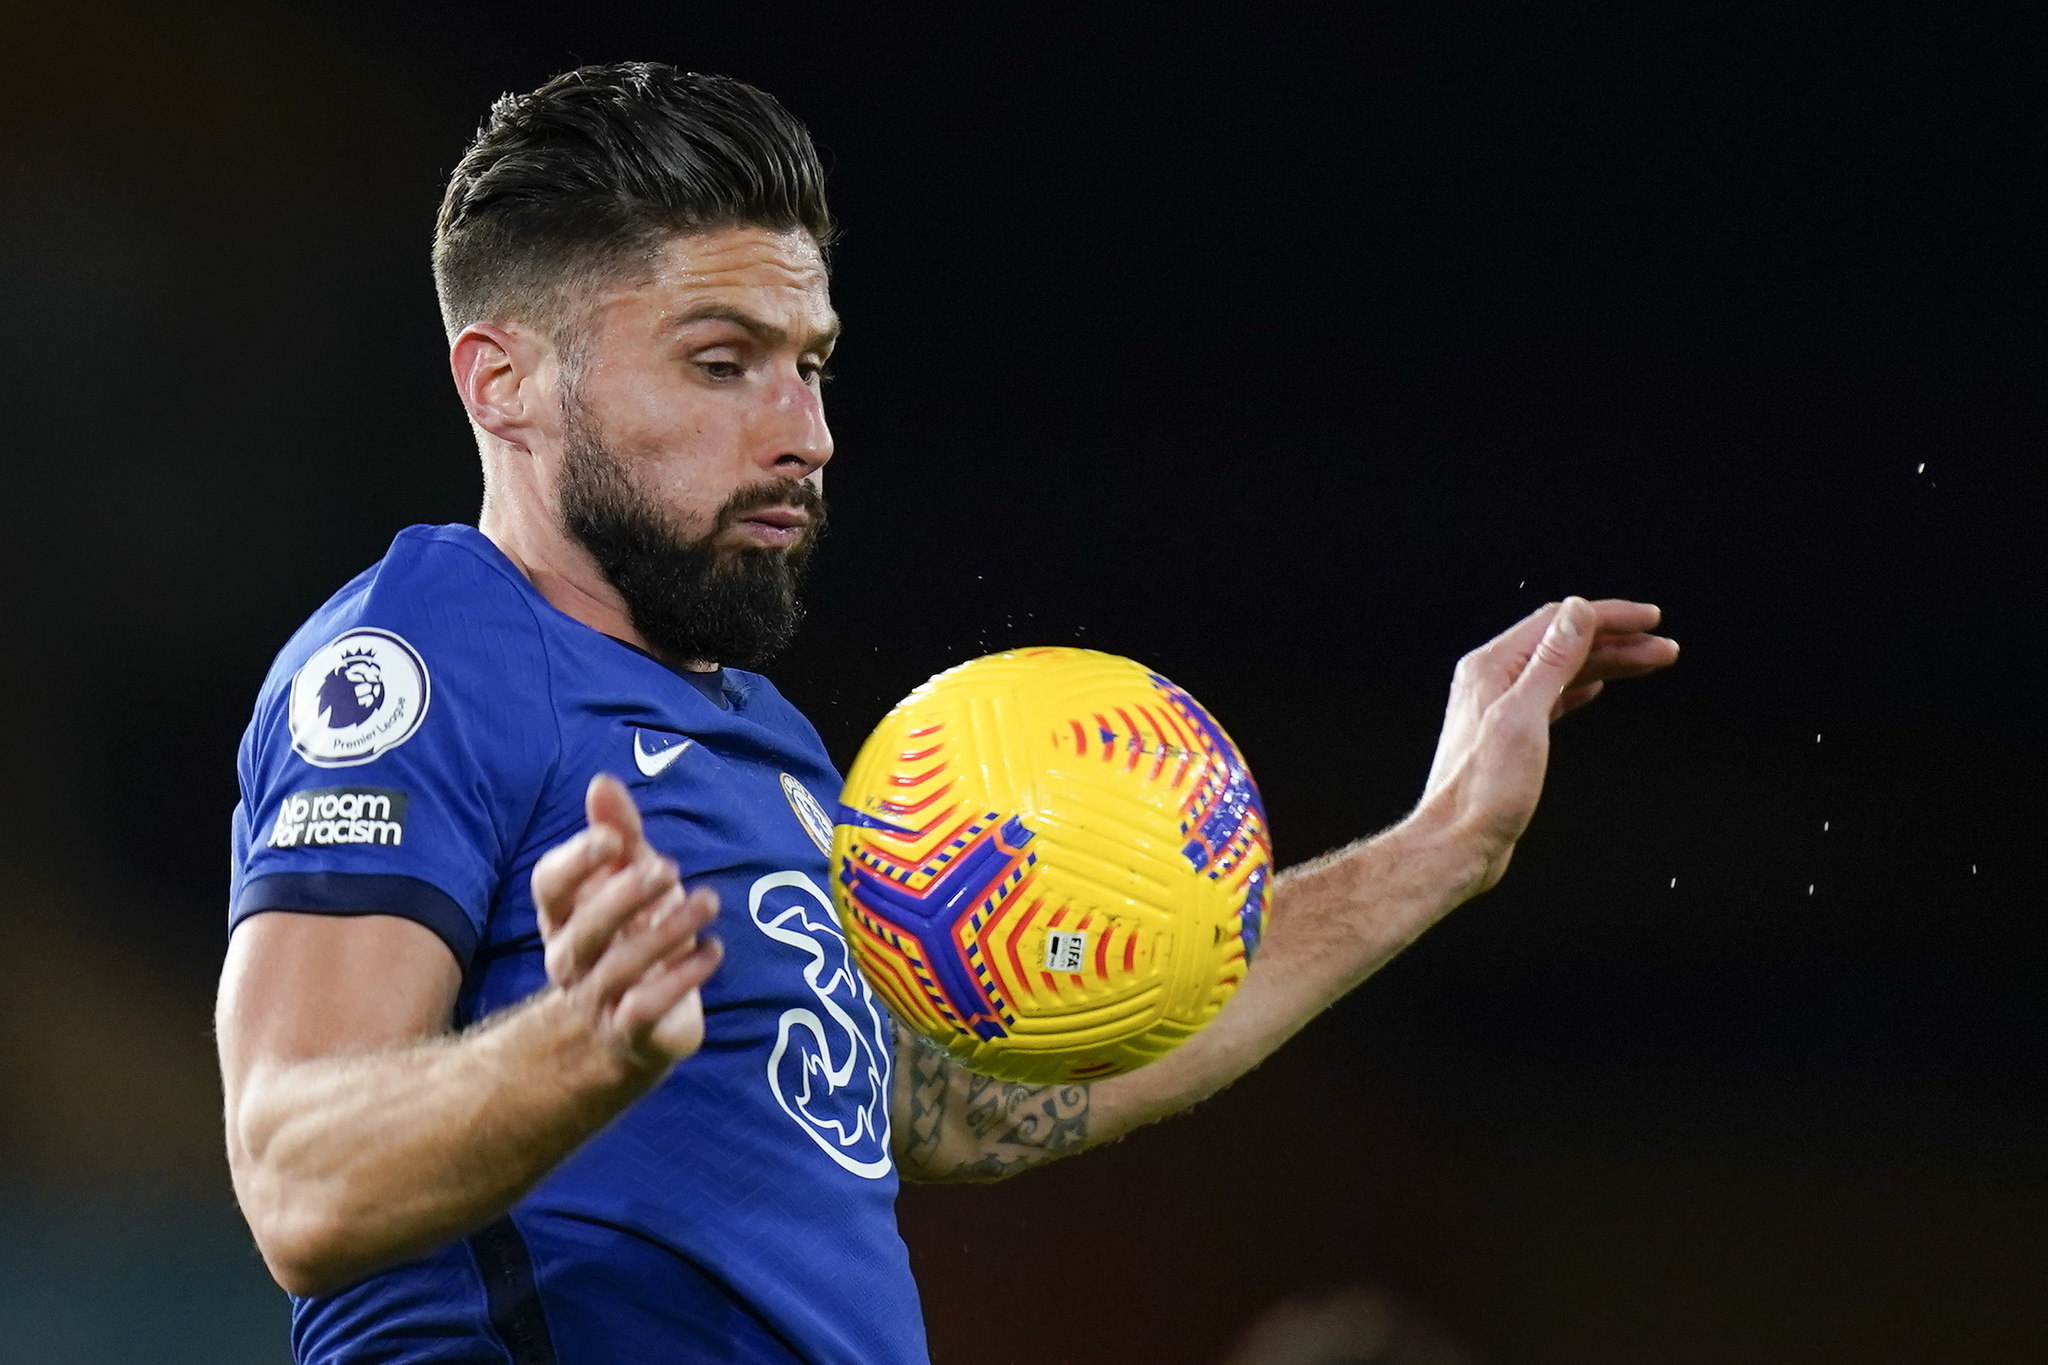 Wolverhampton (United Kingdom), 15/12/2020.- Olivier lt;HIT gt;Giroud lt;/HIT gt; of Chelsea FC in action during the English Premier League match between Wolverhampton Wanderers and Chelsea in Wolverhampton, Britain, 15 December 2020. (Reino Unido) EFE/EPA/Tim Keeton / POOL EDITORIAL USE ONLY. No use with unauthorized audio, video, data, fixture lists, club/league logos or 'live' services. Online in-match use limited to 120 images, no video emulation. No use in betting, games or single club/league/player publications